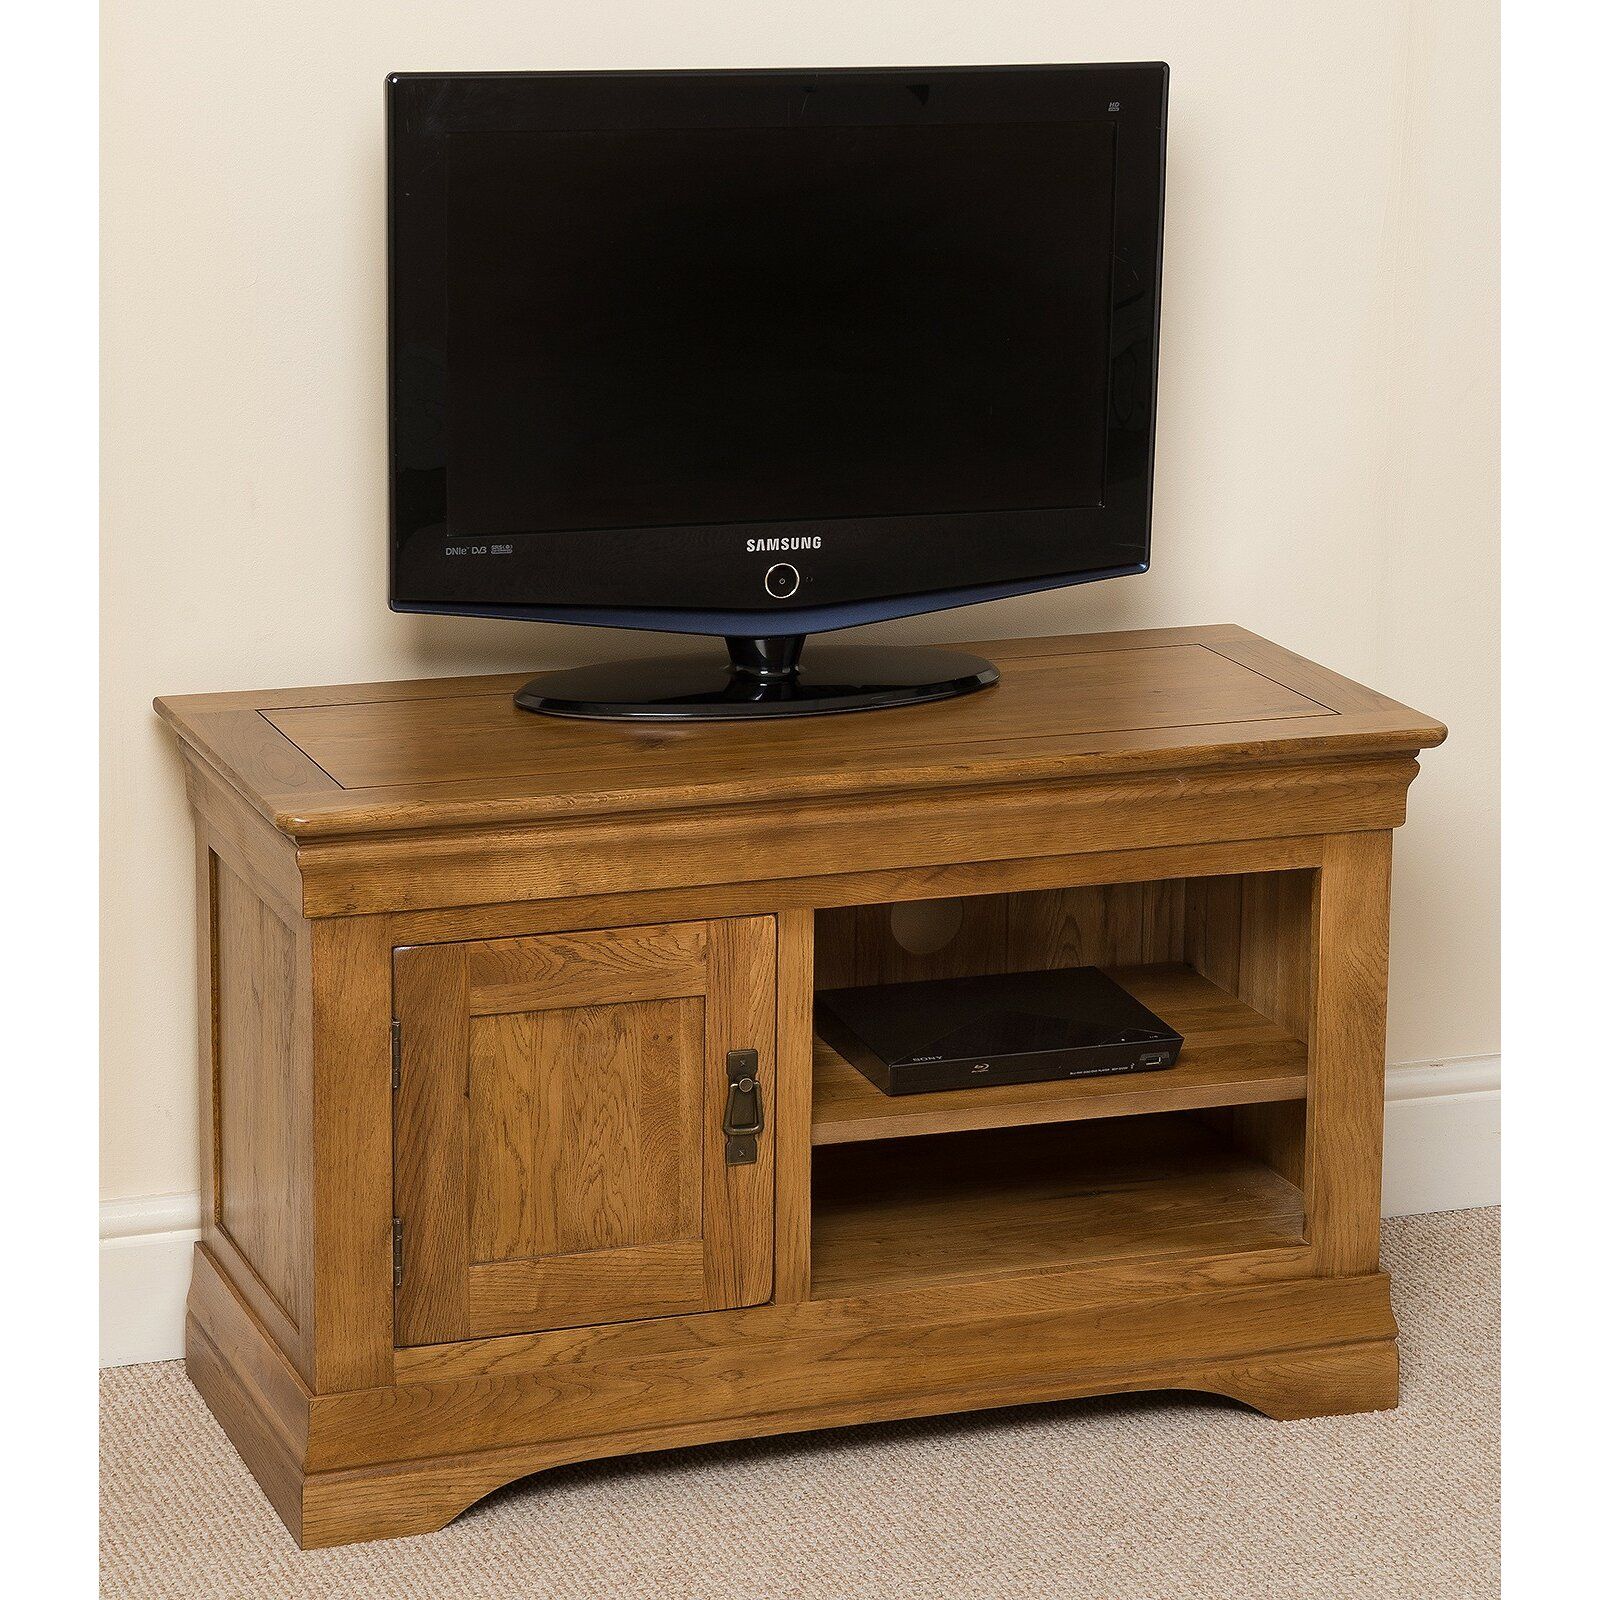 Hokku Designs French Tv Stand For Tvs Up To 40" | Wayfair Uk Throughout Hokku Tv Stands (View 8 of 15)